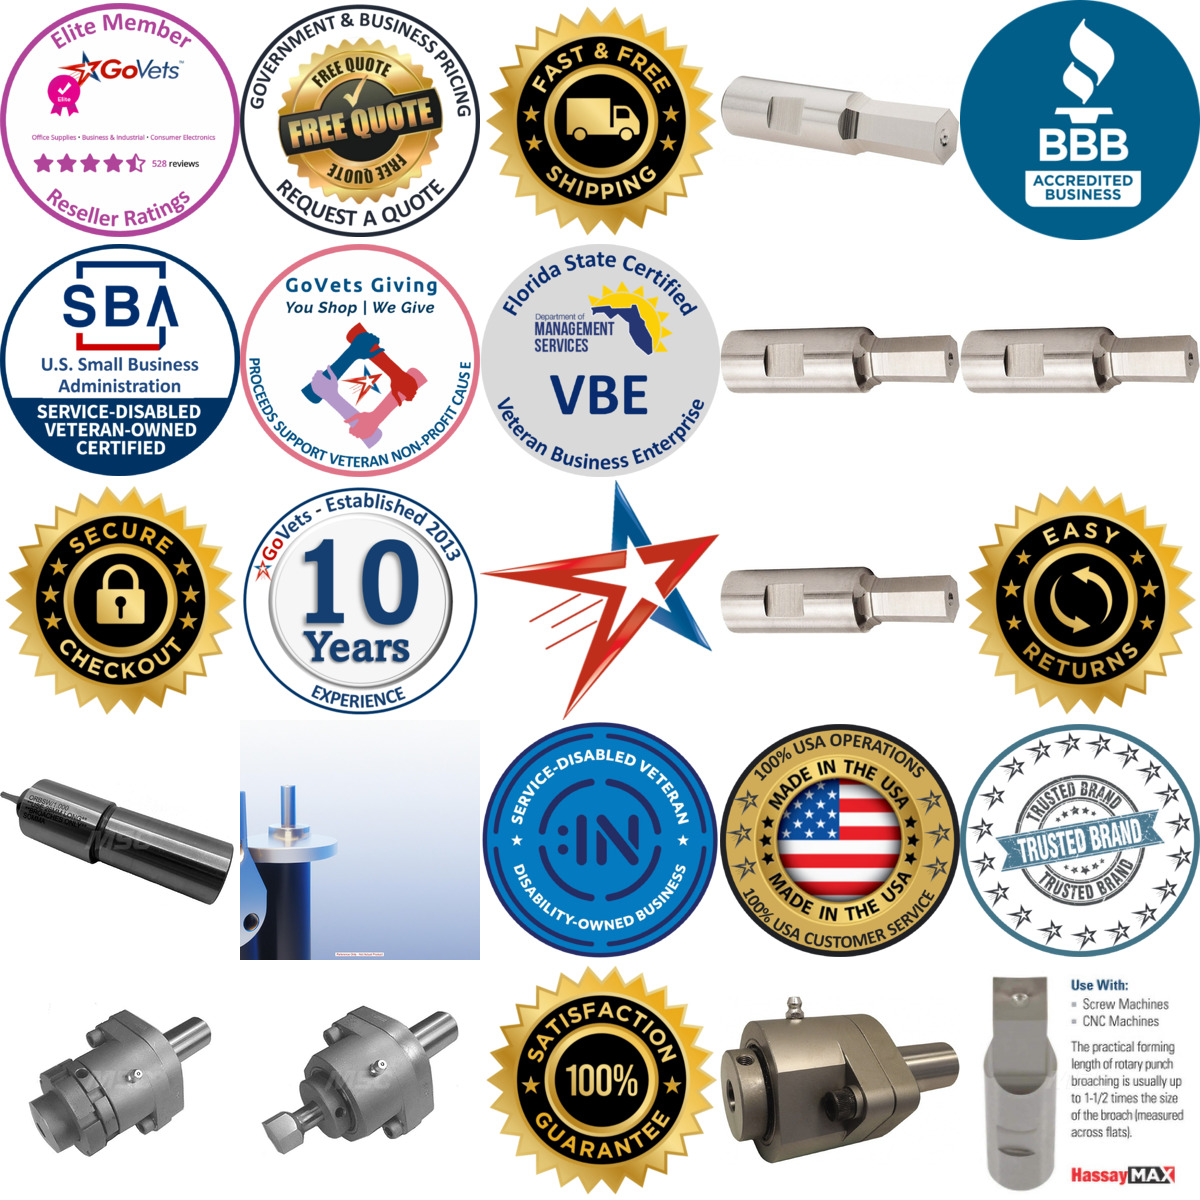 A selection of Rotary Broaches Holders and Accessories products on GoVets